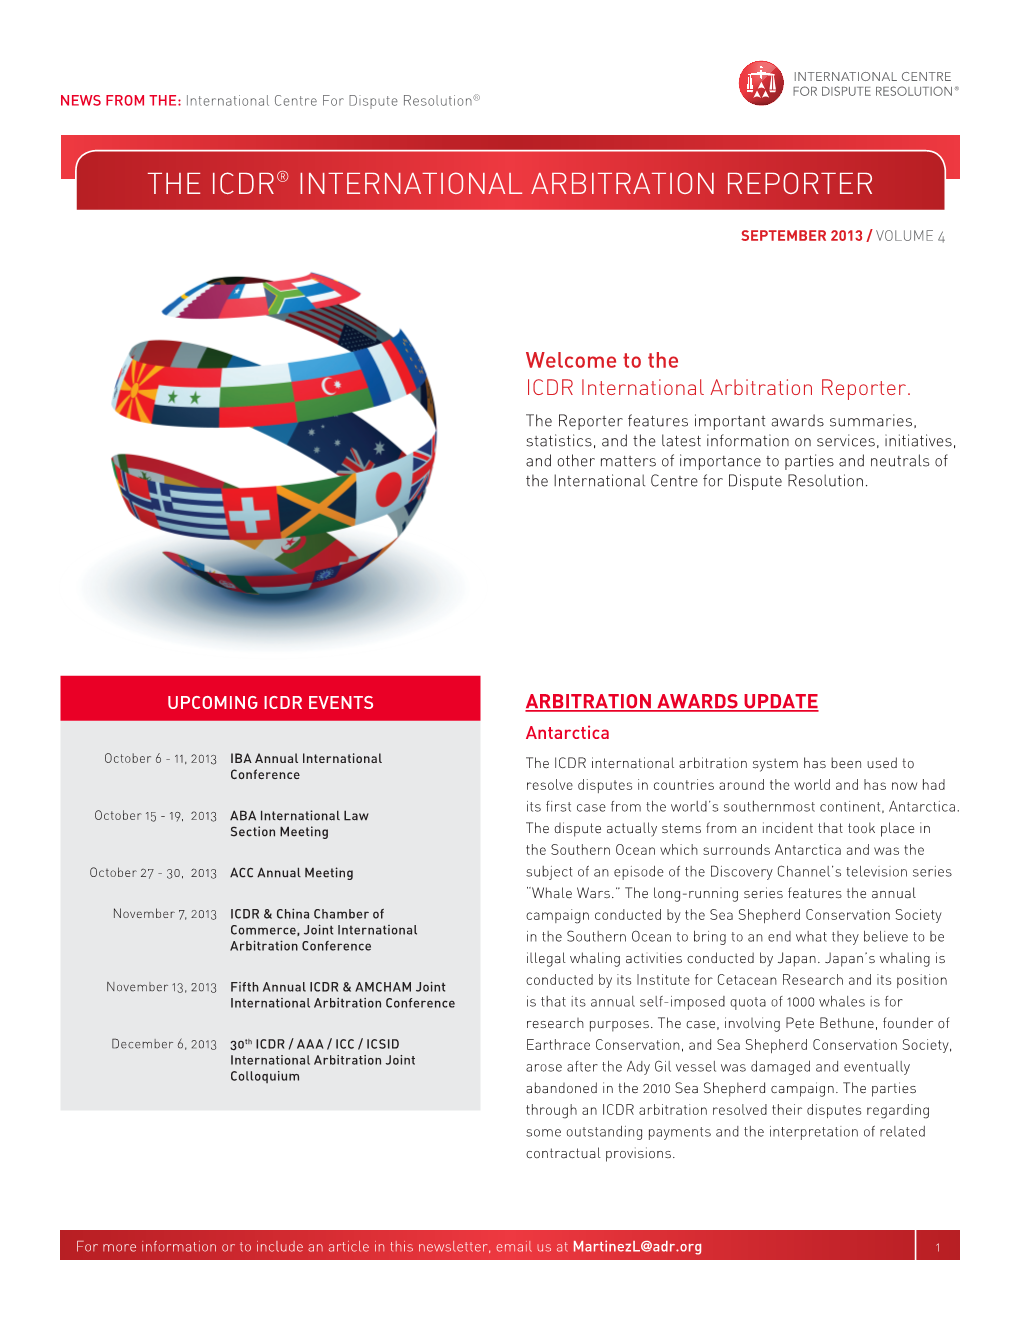 The Icdr® International Arbitration Reporter